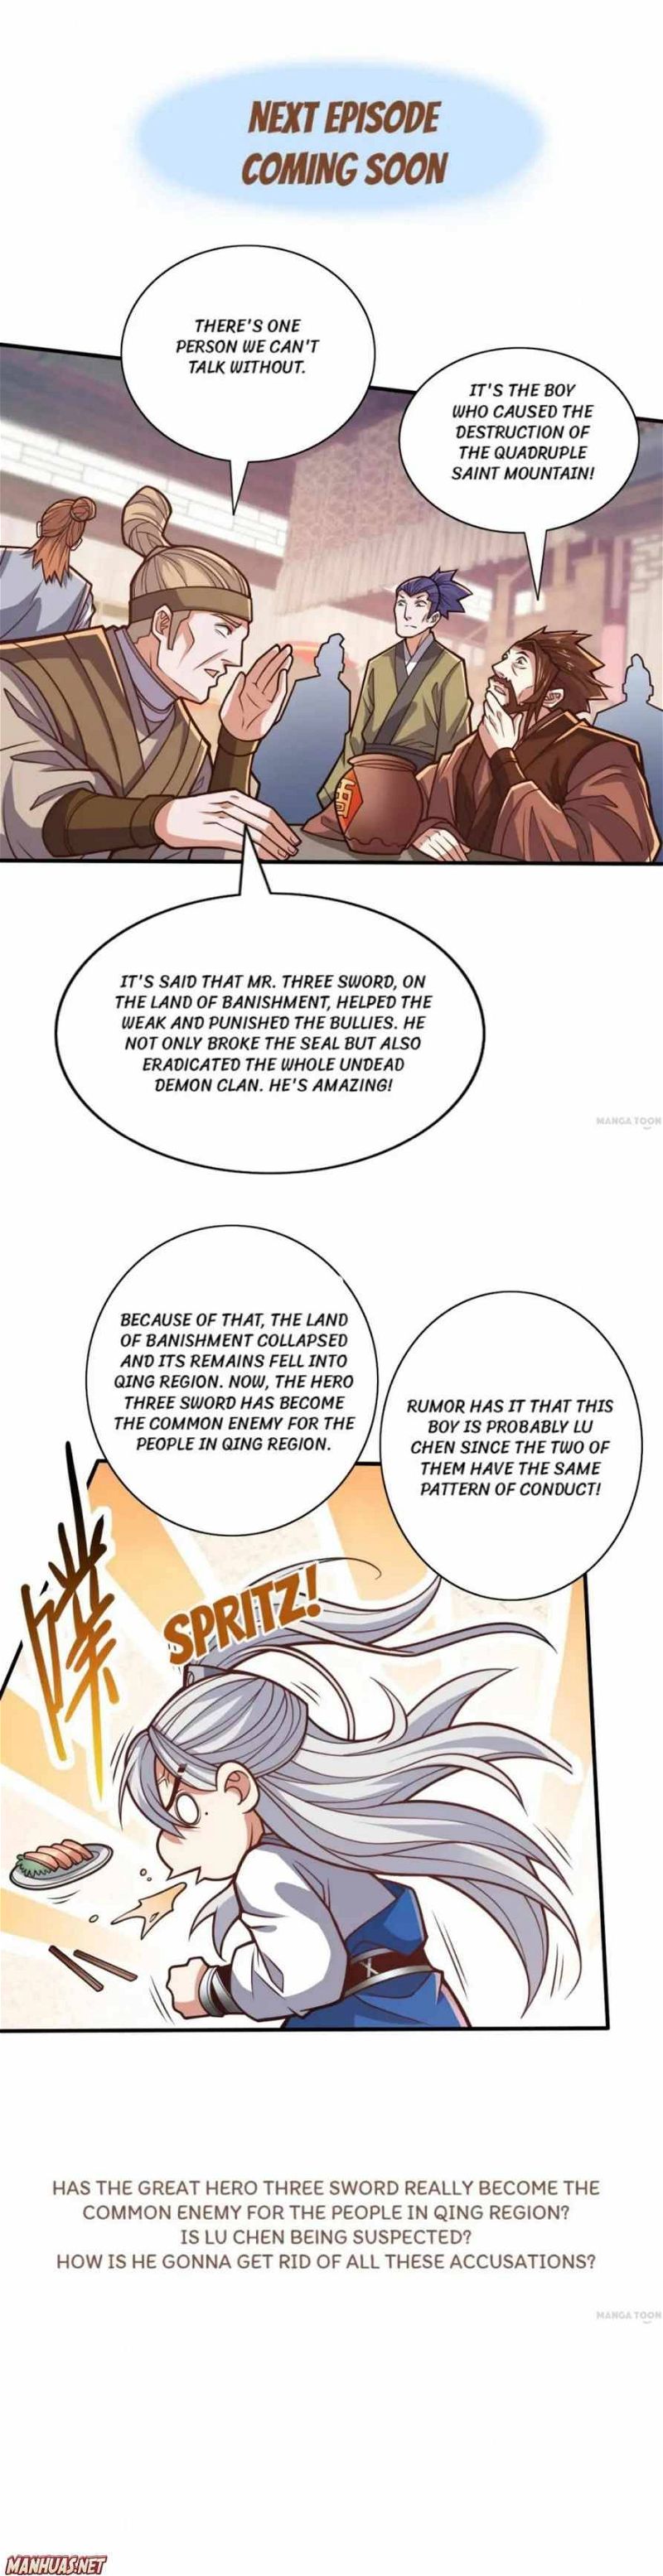 99 Ways to Become Heroes by Beauty Masters Chapter 113 page 5